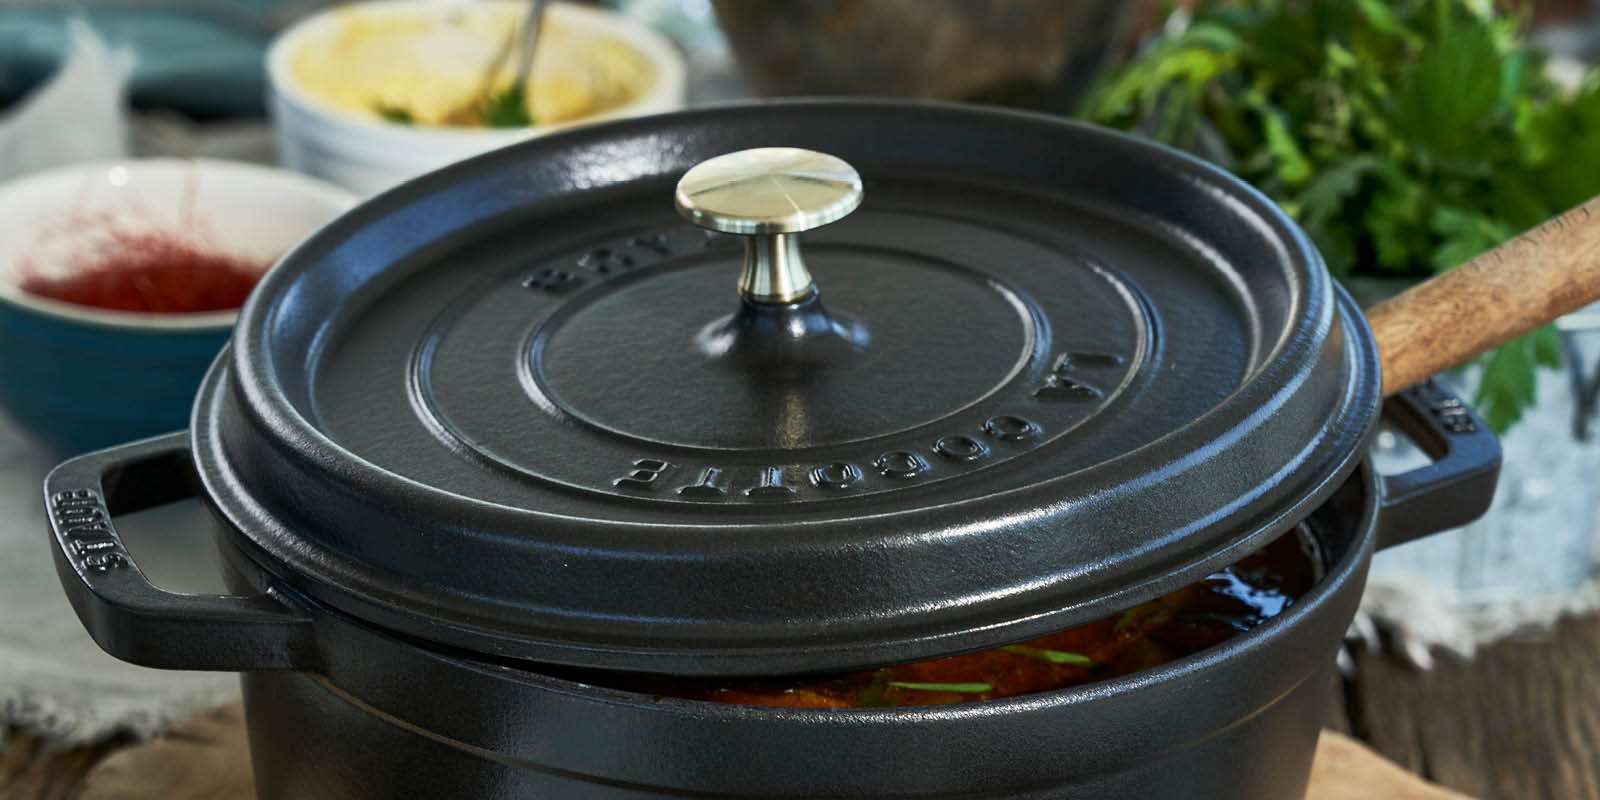 https://www.zwilling.com/on/demandware.static/-/Sites-zwilling-ca-Library/default/dwe8f14b1b/images/product-content/masonry-content/staub/cookware/la-cocotte/40500-241-0_Lifestyle_Image_Series_OS_1200x600.jpg